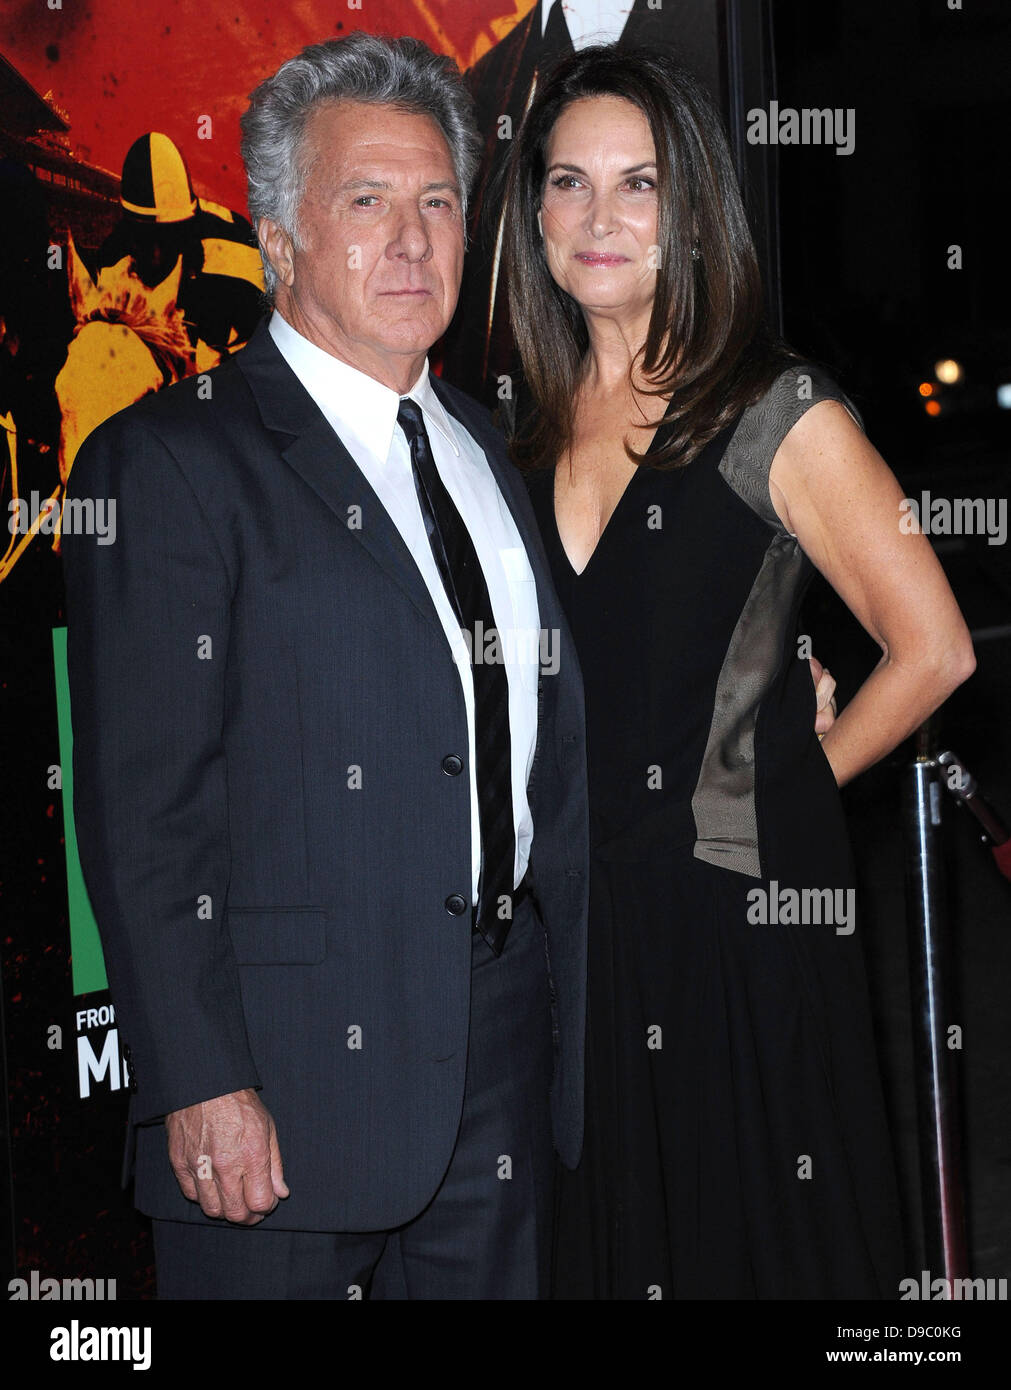 Dennis Farina and his wife Lisa HBO's 'LUCK' Los Angeles Premiere held at  Grauman's Chinese Theatre Los Angeles, California - 25.01.12 Stock Photo -  Alamy